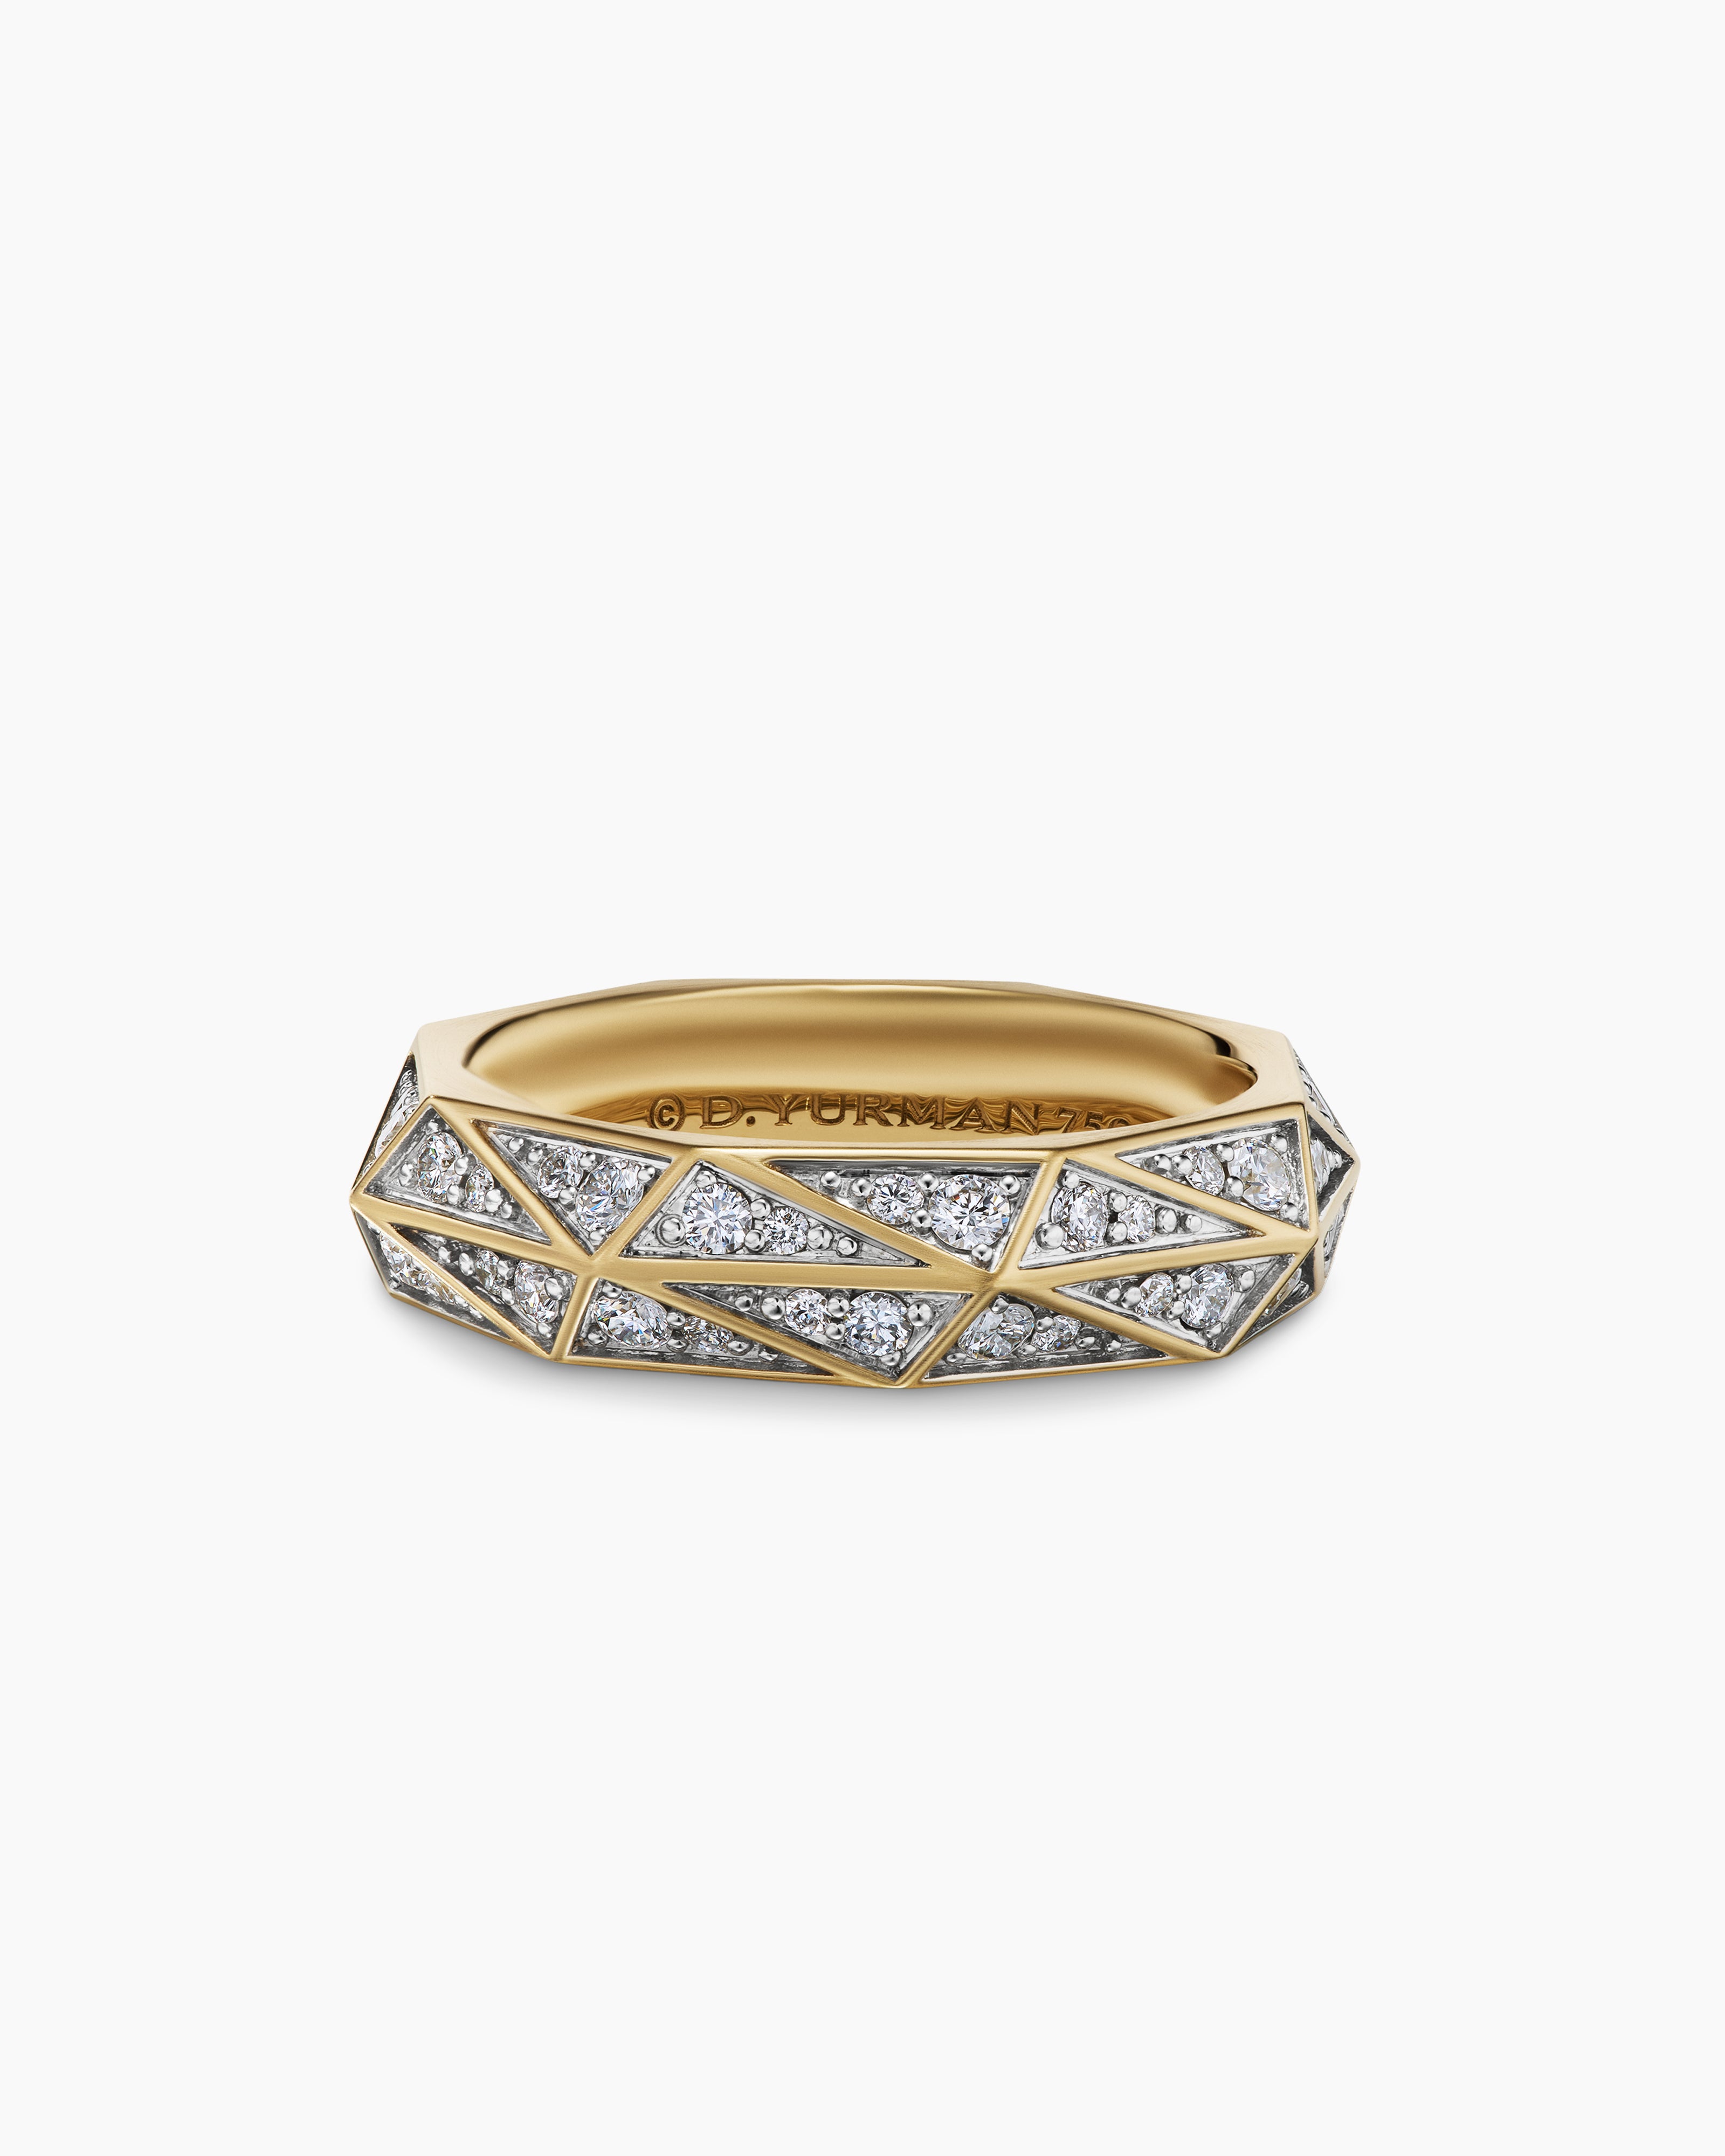 David Yurman Torqued Faceted Band Ring18k Yellow Gold with Diamonds, 6mm | Men's | Size 11